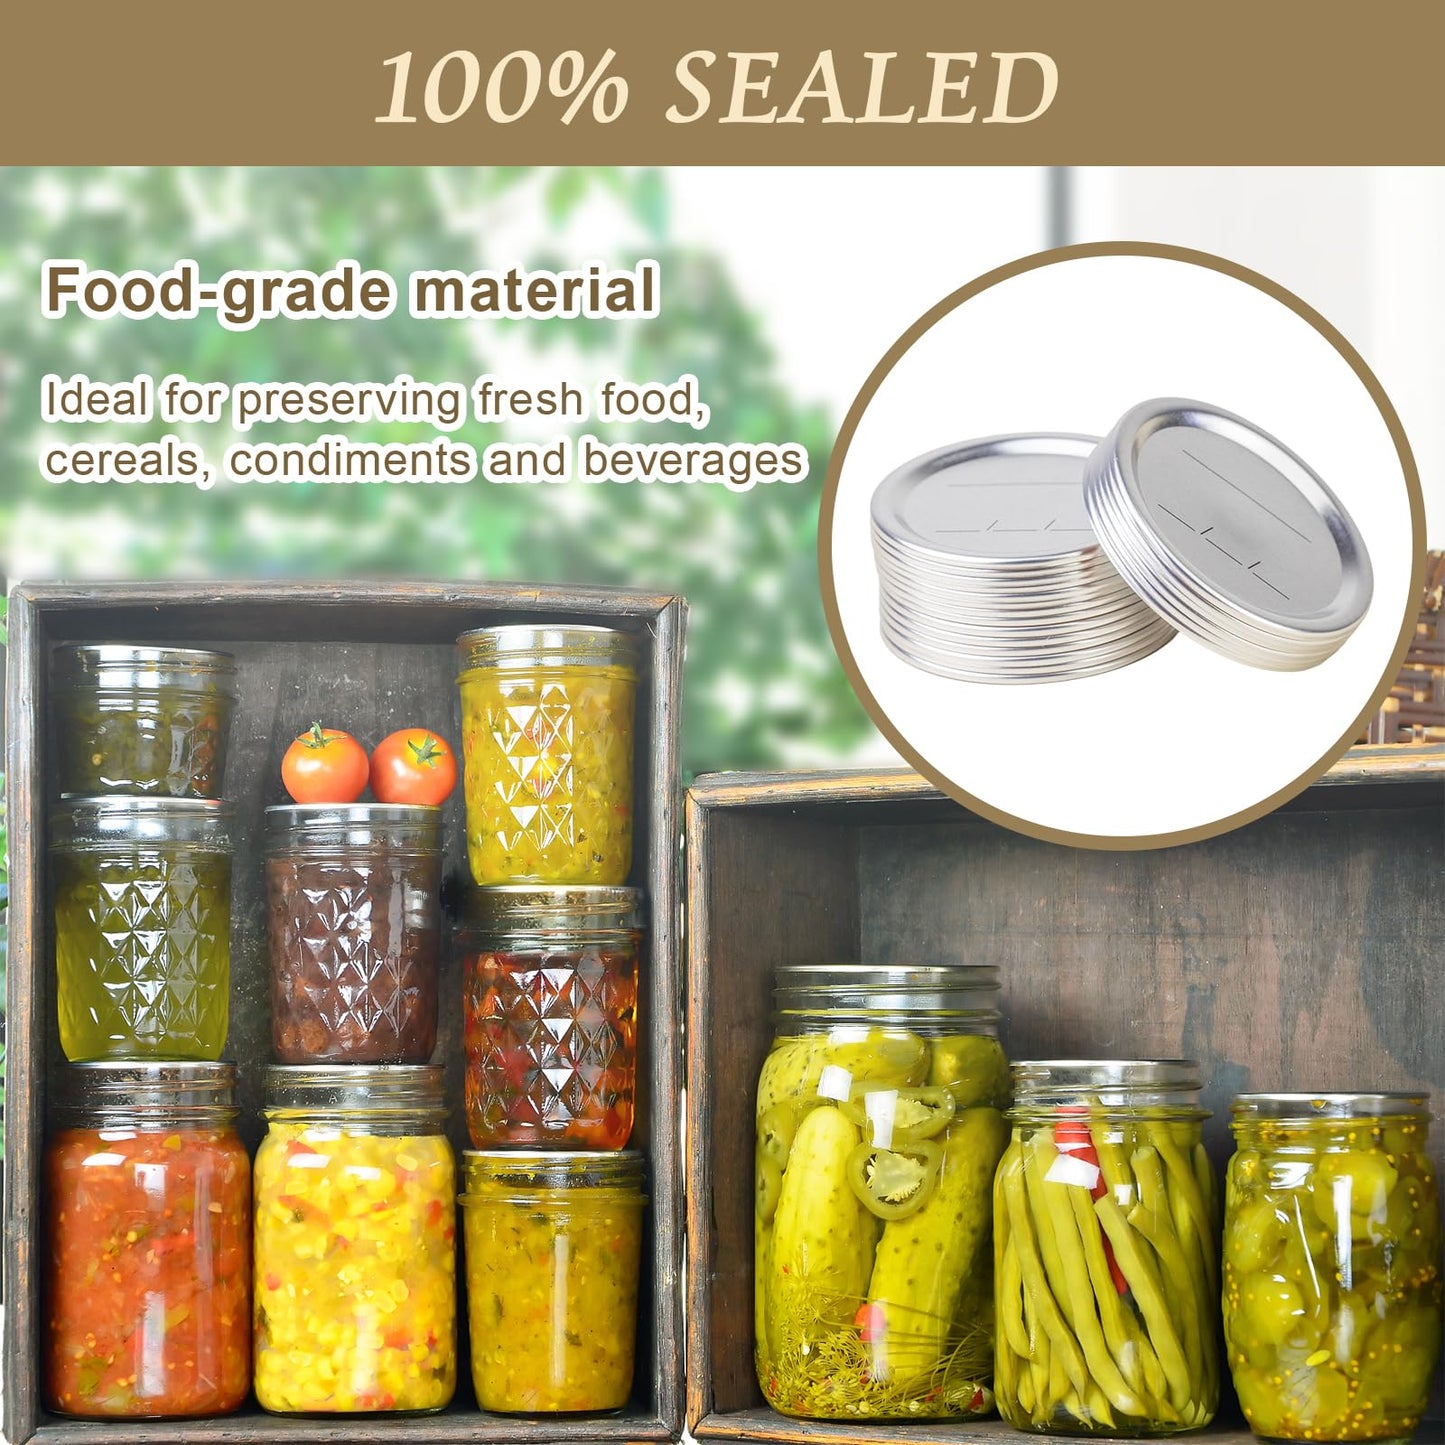 200 PCS Canning Lids Regular Mouth,2.76in Mouth Mason Jar Lids,Ball Kerr Jar with Lids with Leak proof Airtight Seal Rust Proof Split,Regular Mouth Kerr Mason Jars Food Grade,Canning Food DIY